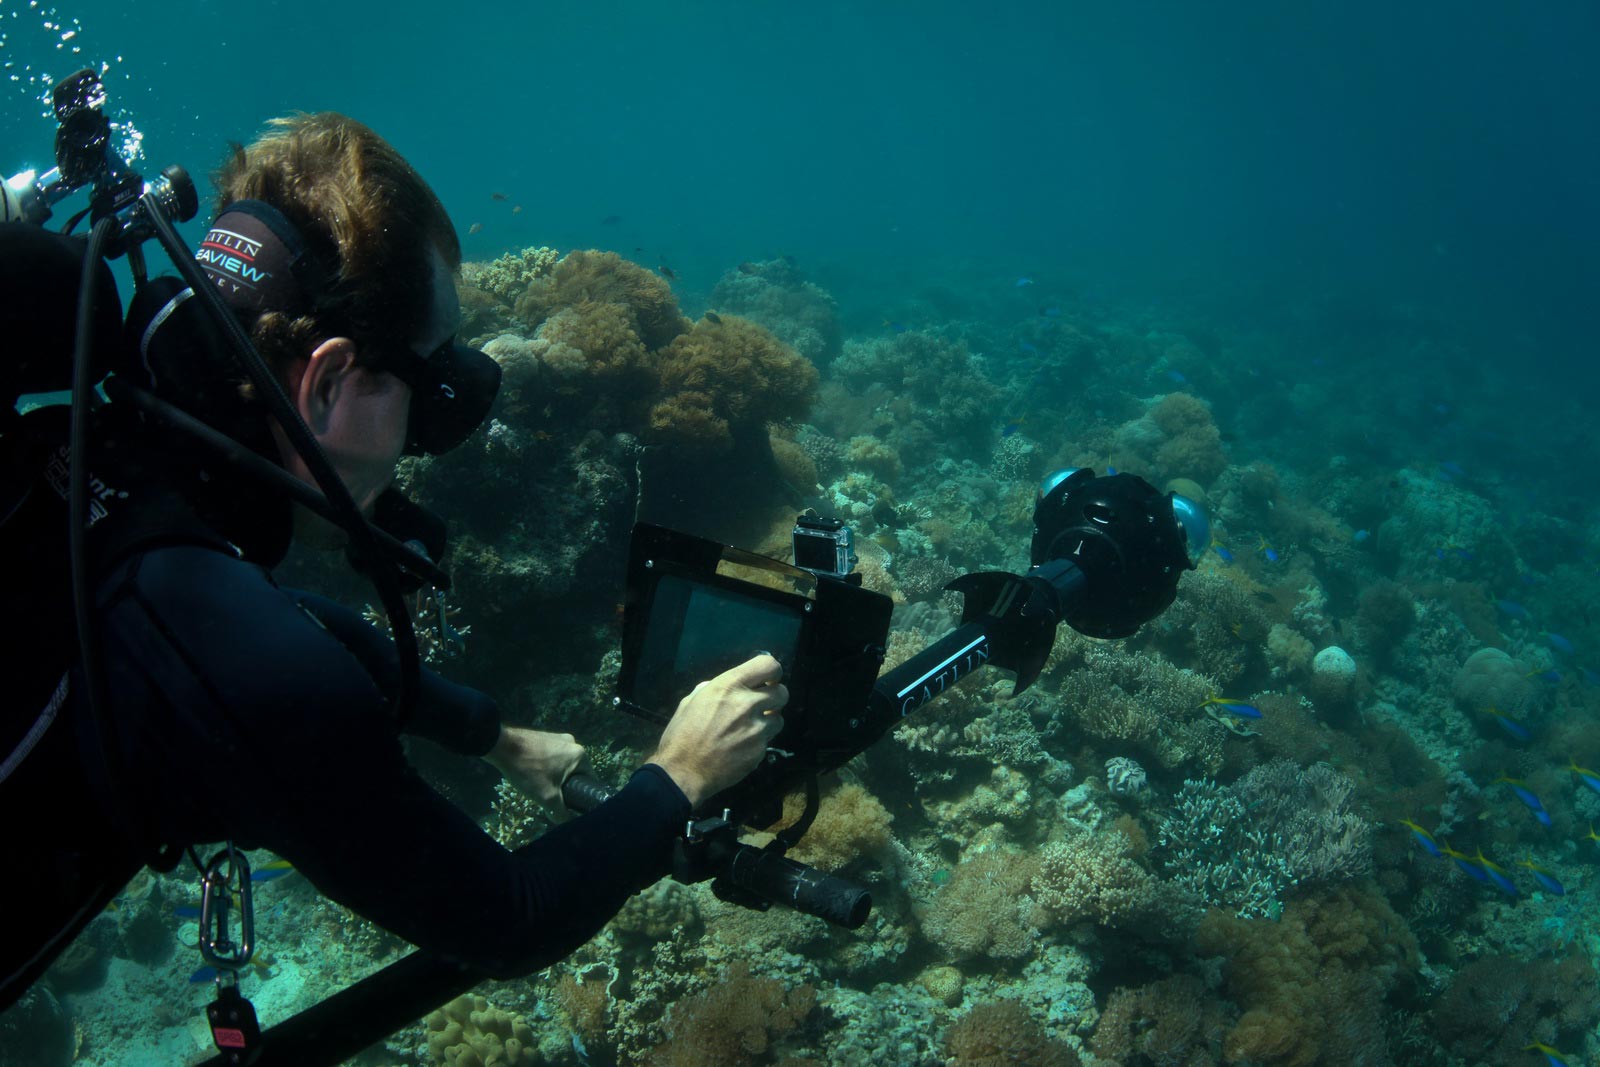 CATLIN SEAVIEW SURVEY | Stories | The Coral Triangle